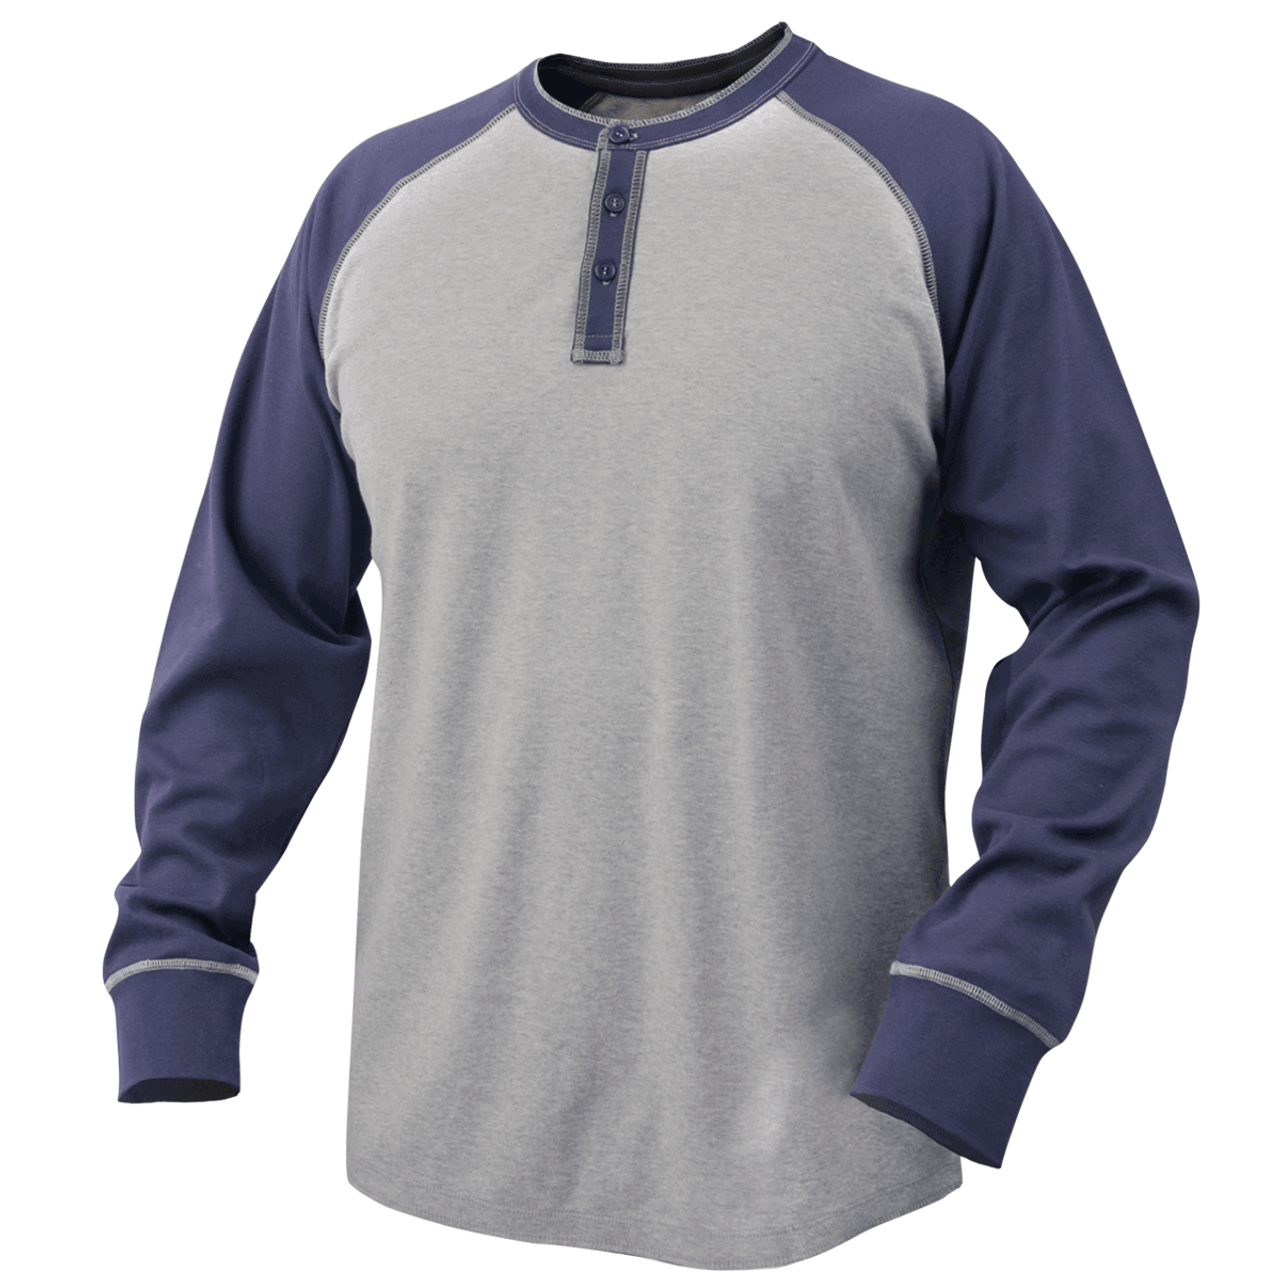 7 oz. Flame-Resistant Cotton Jersey Henley, Navy/Gray